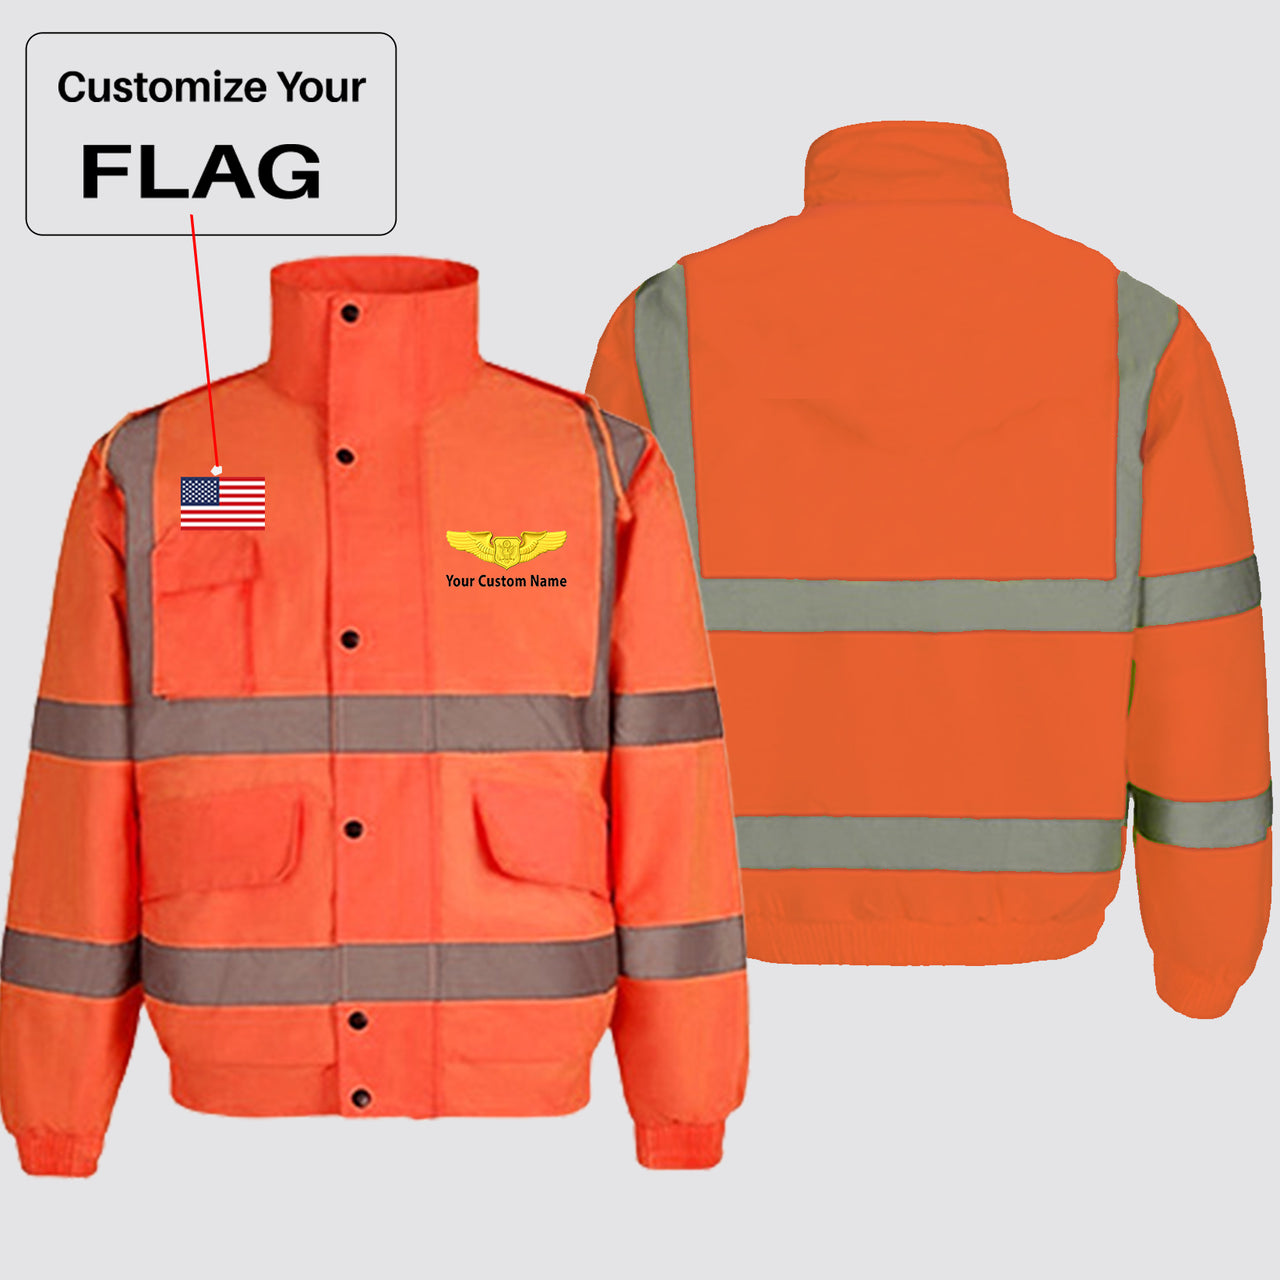 Custom Flag & Name with (Special US Air Force) Designed Reflective Winter Jackets